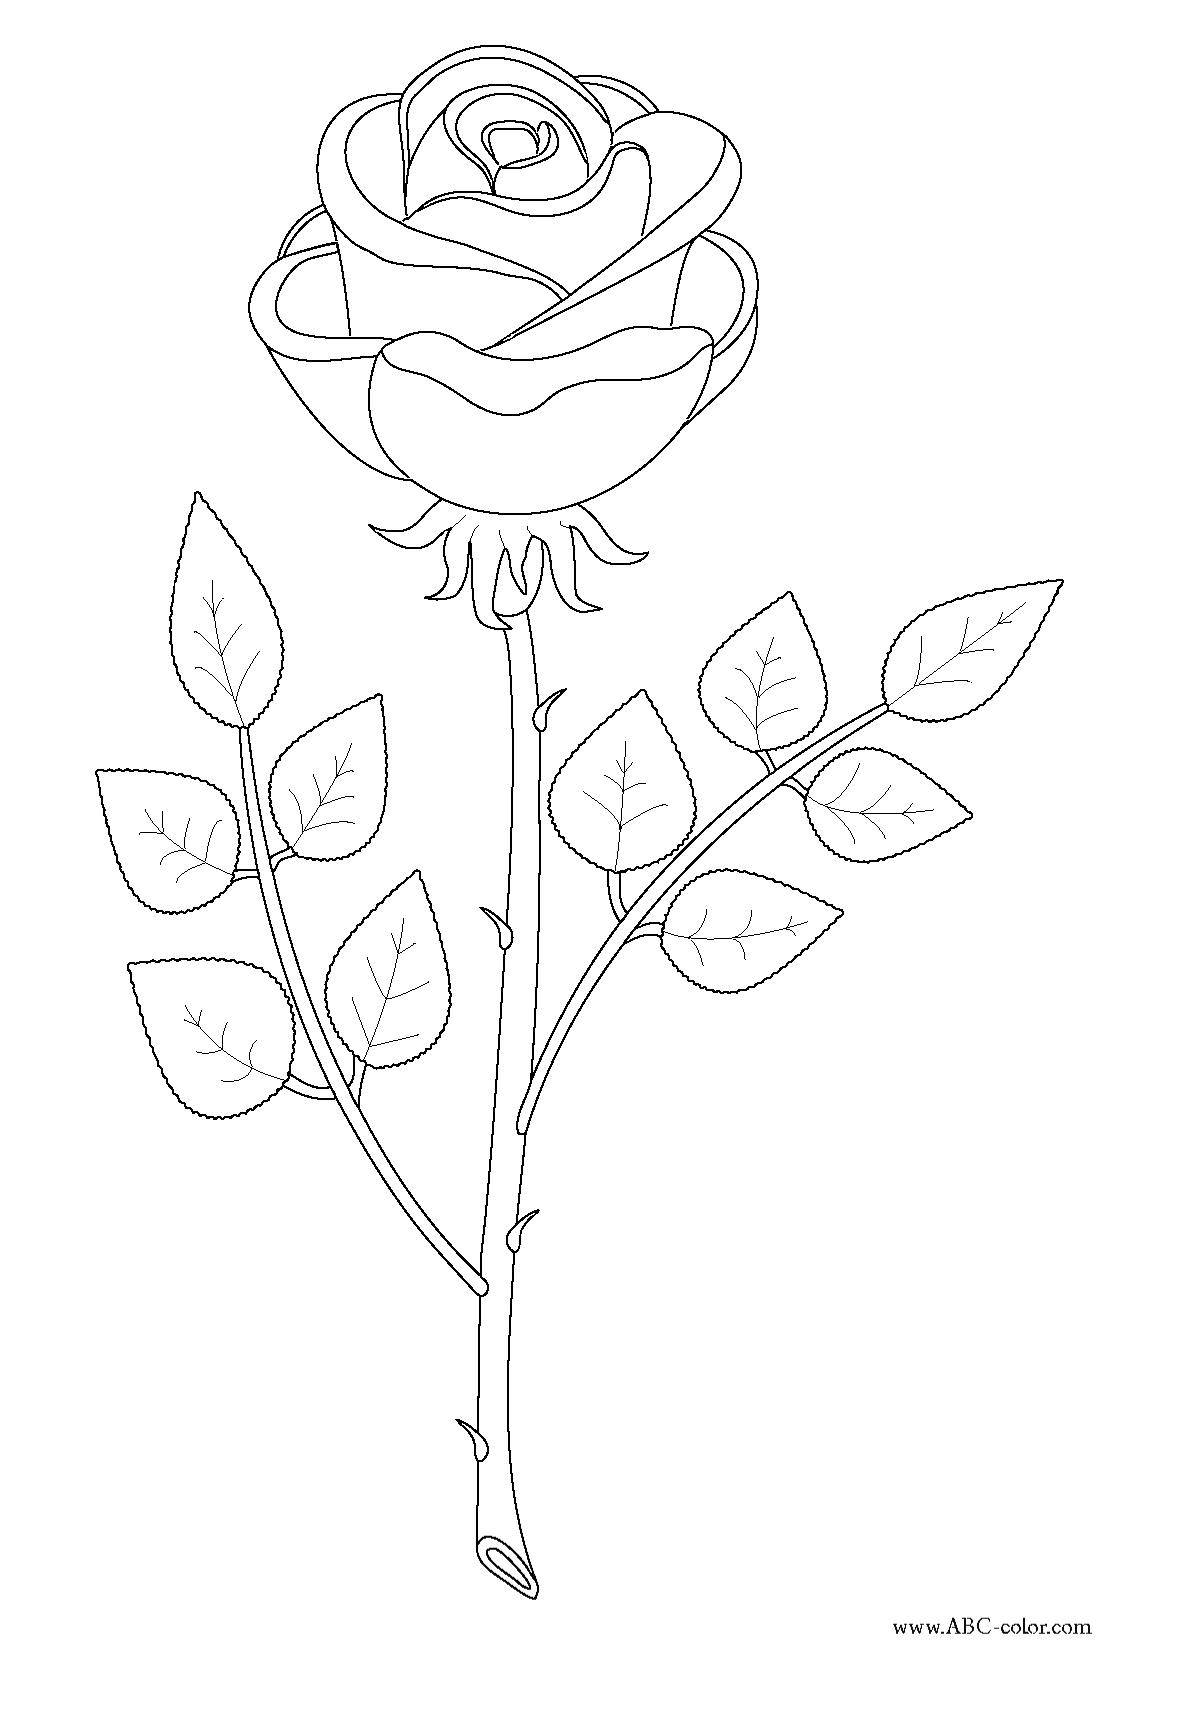 Coloring Drawing a rose with thorns. Category Pets allowed. Tags:  Rose.